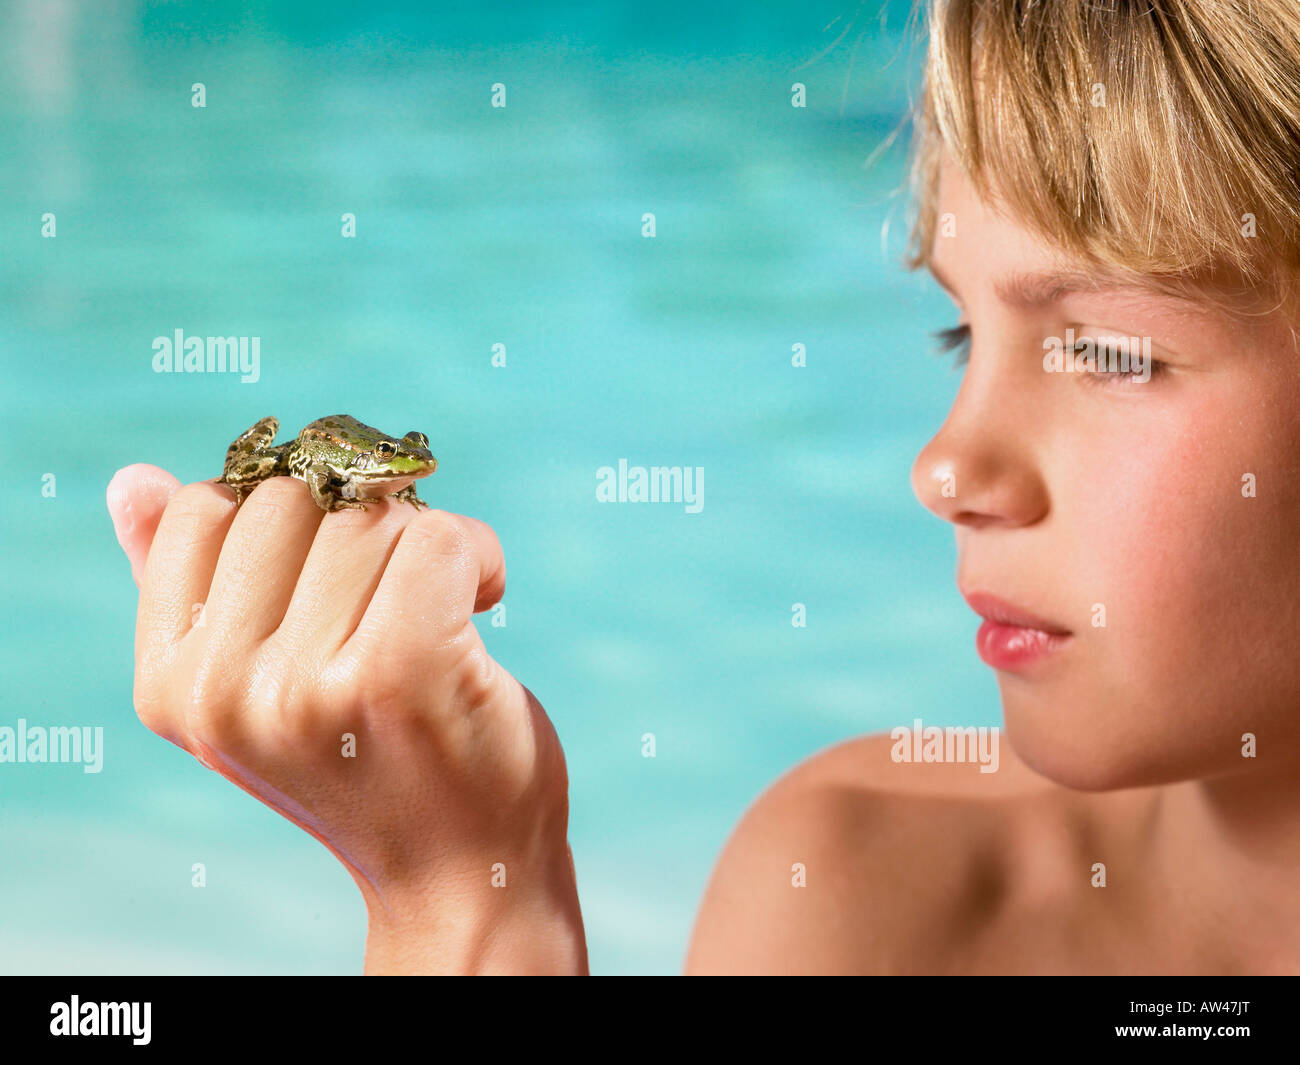 Boy holding a frog in his hand. Stock Photo